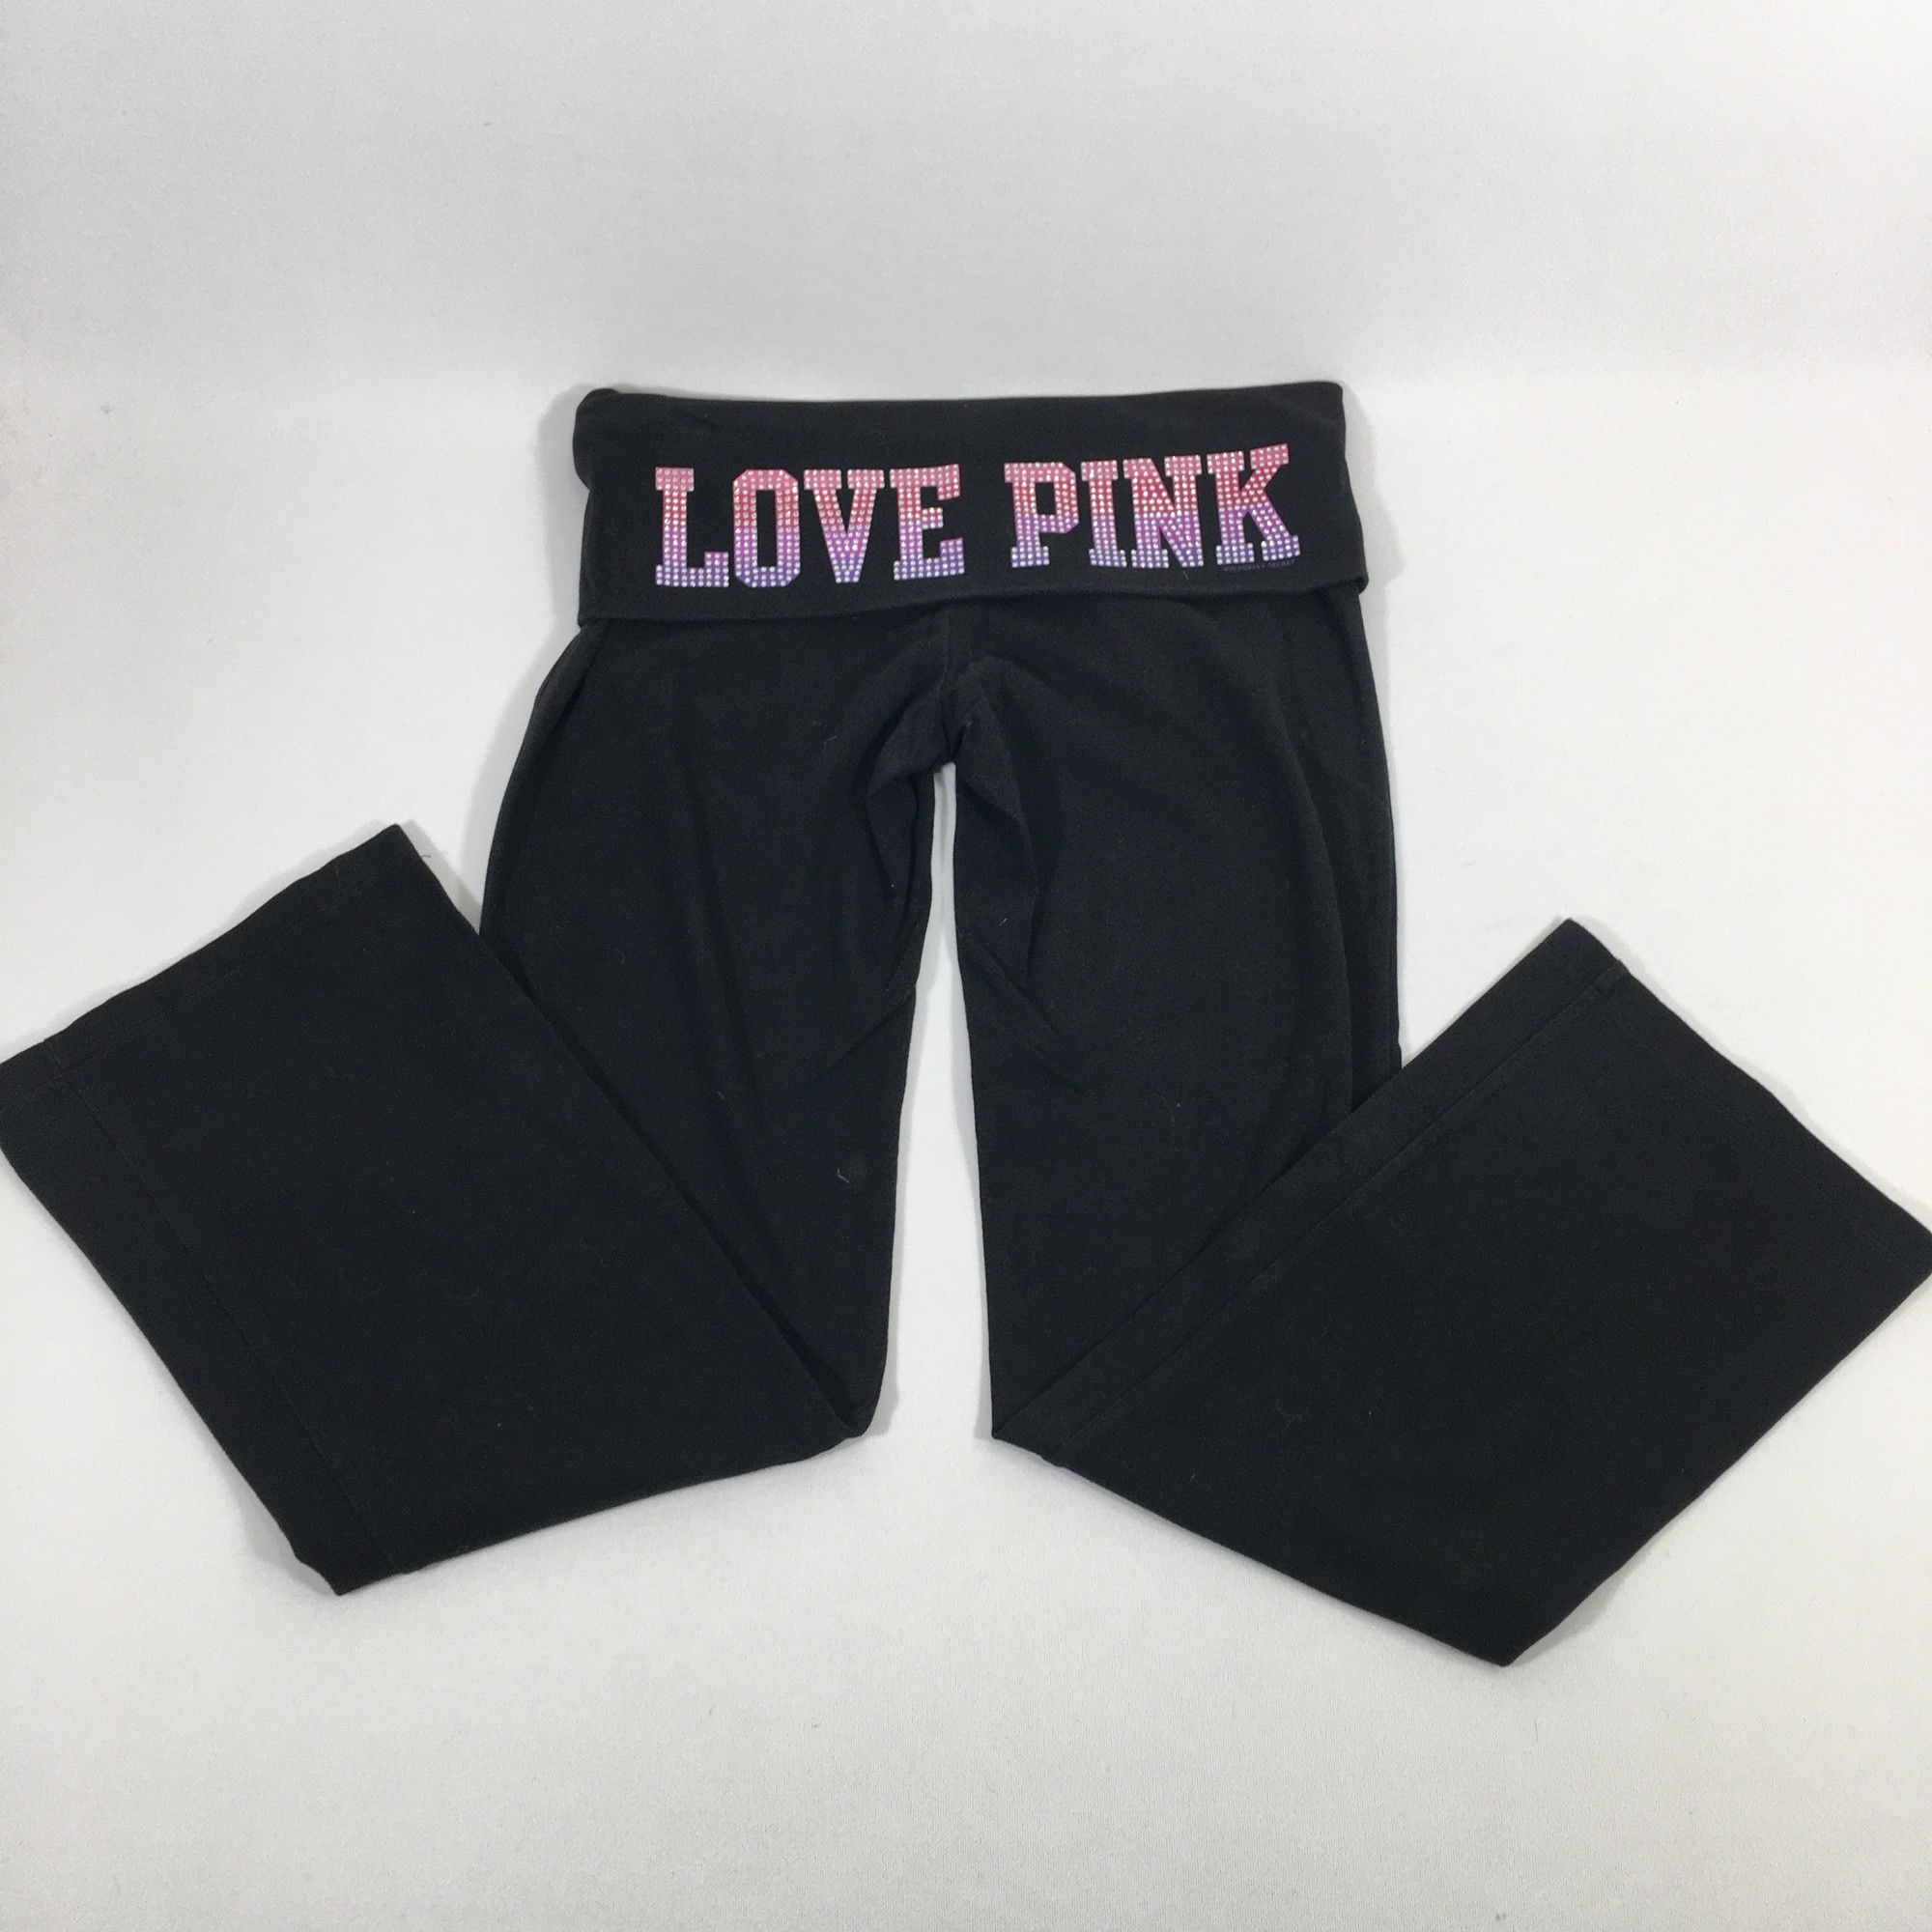 PINK BY VICTORIA'S SECRET YOGA PANTS SIZE SMALL